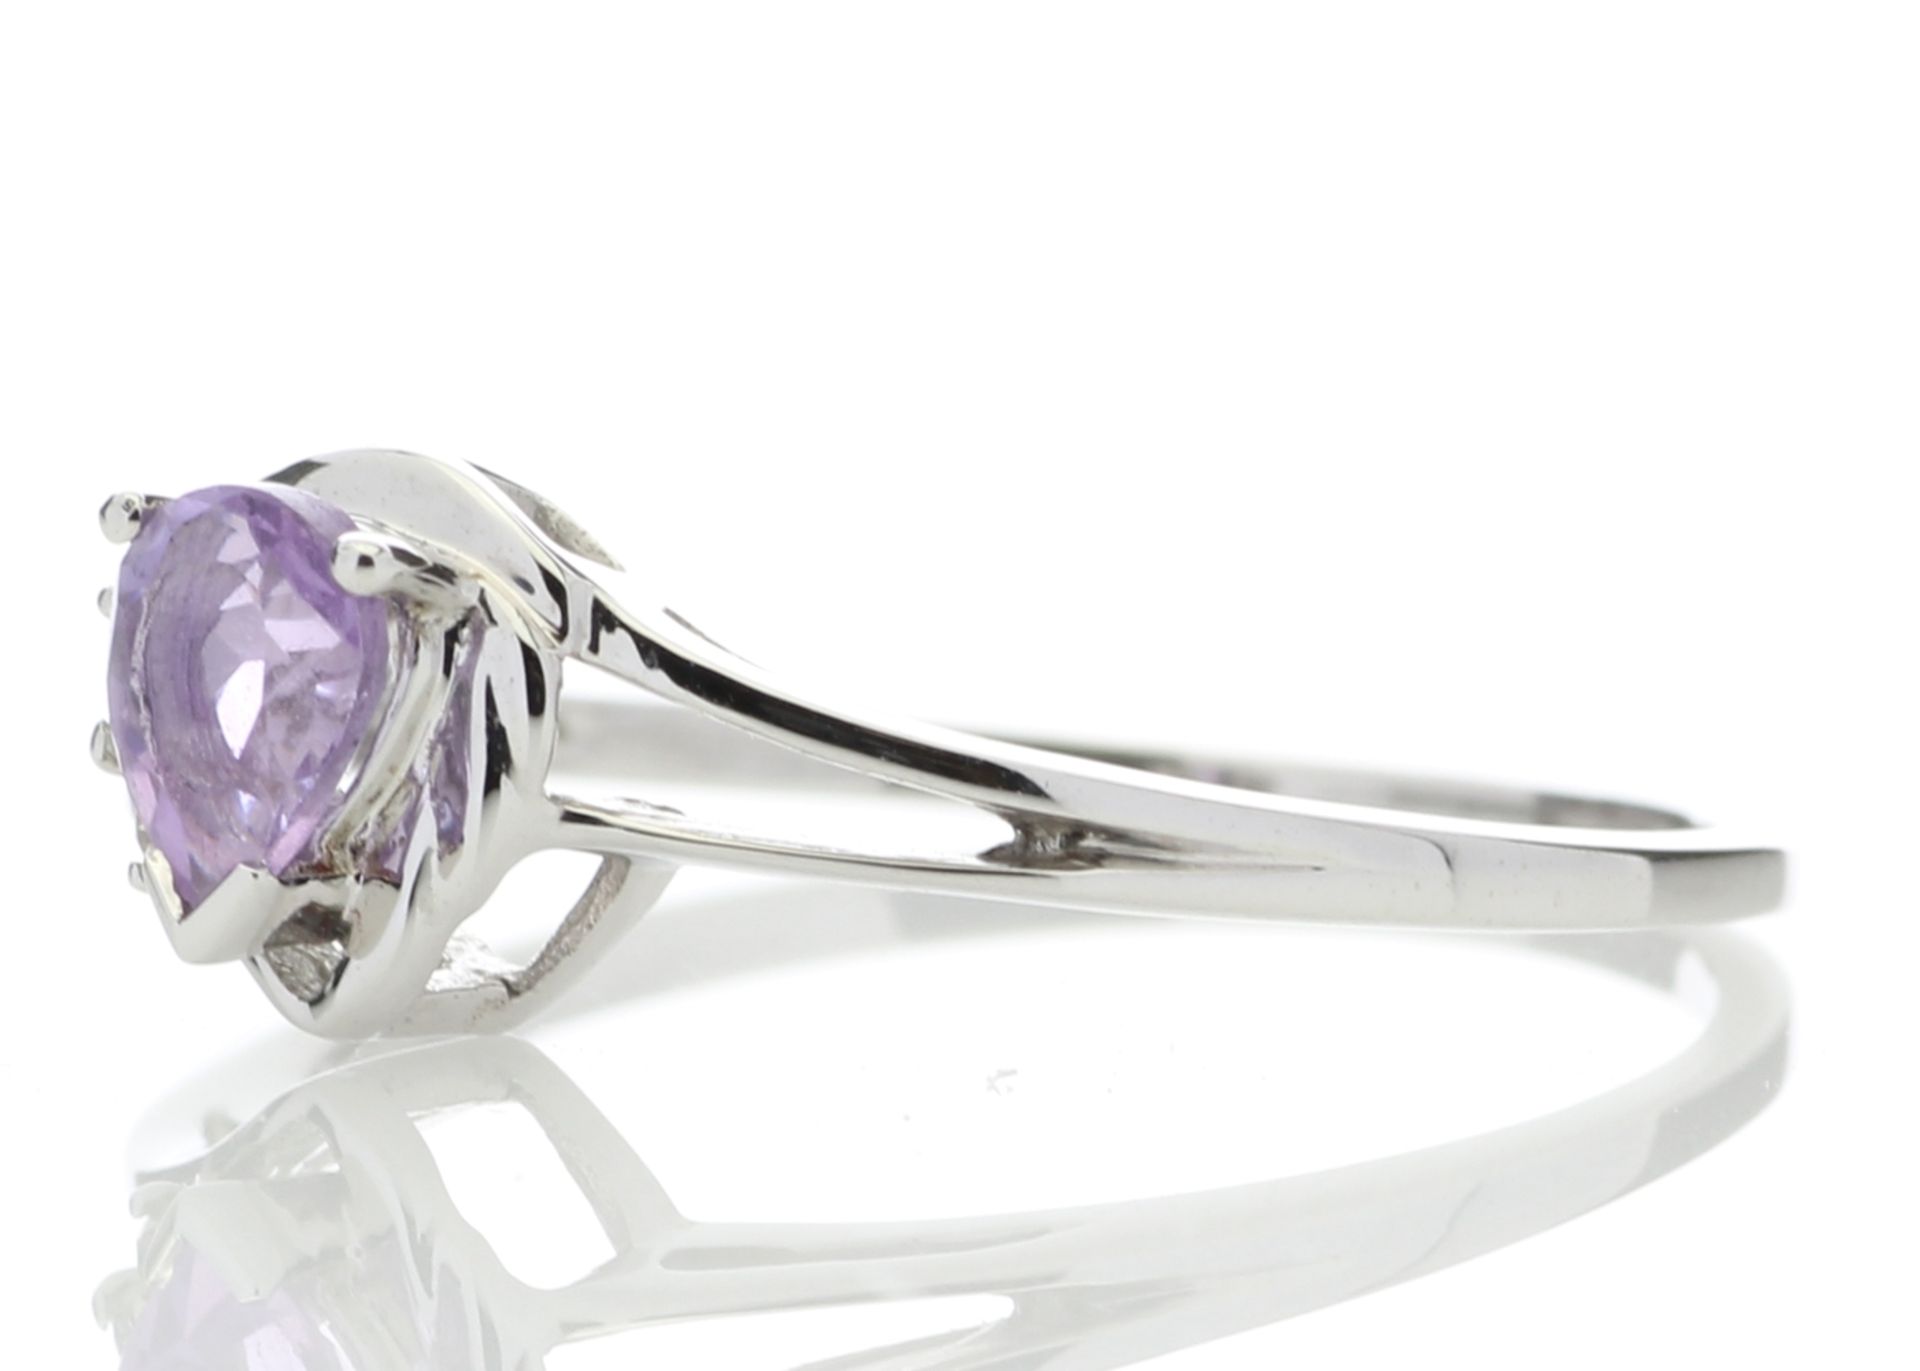 9ct White Gold Amethyst Pear Shaped Diamond Ring (A0.42) 0.03 Carats - Image 2 of 5